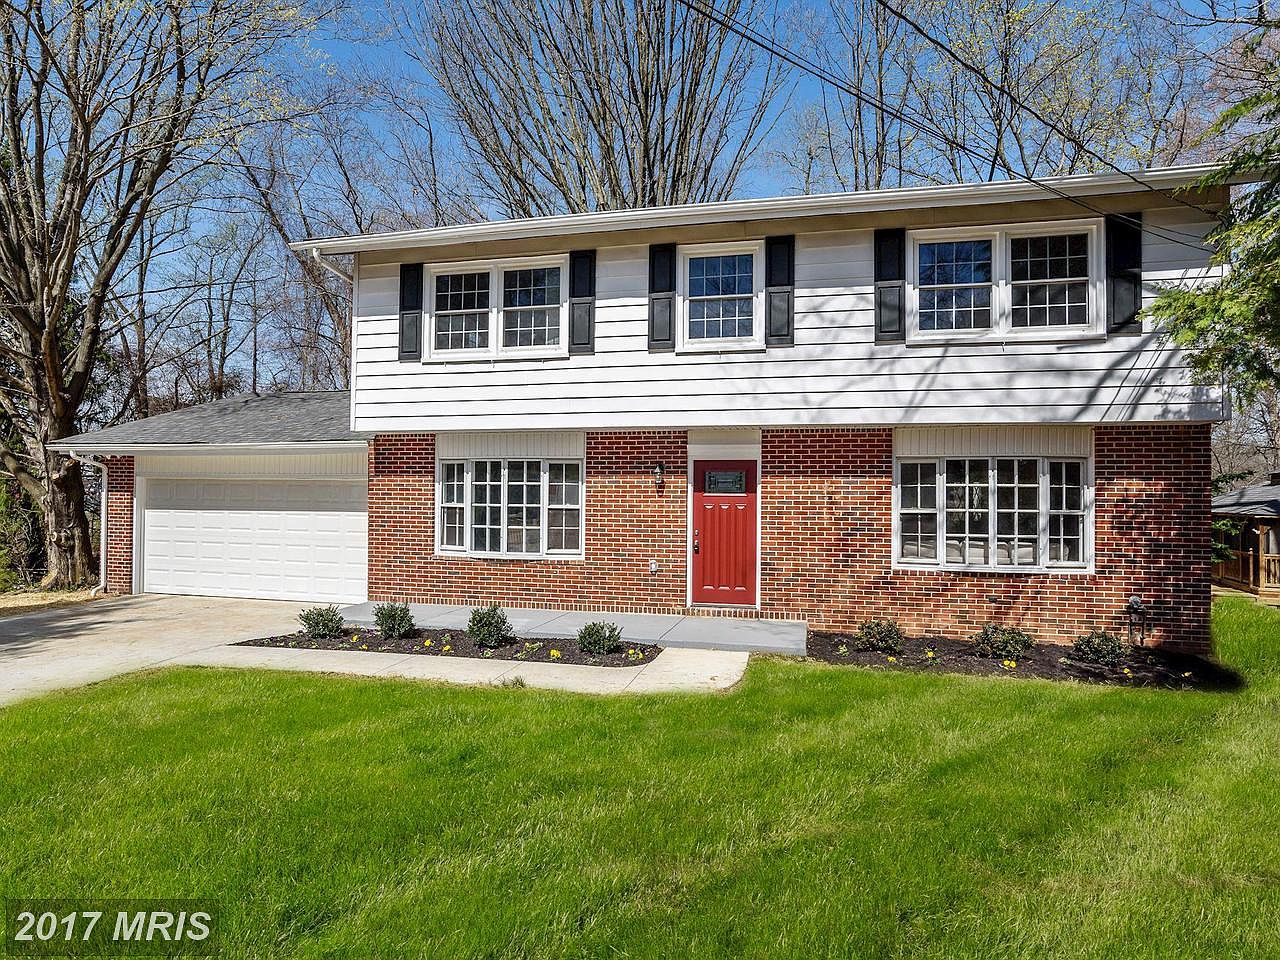 301 Terrysyde Ct, Fallston, MD 21047 | Zillow